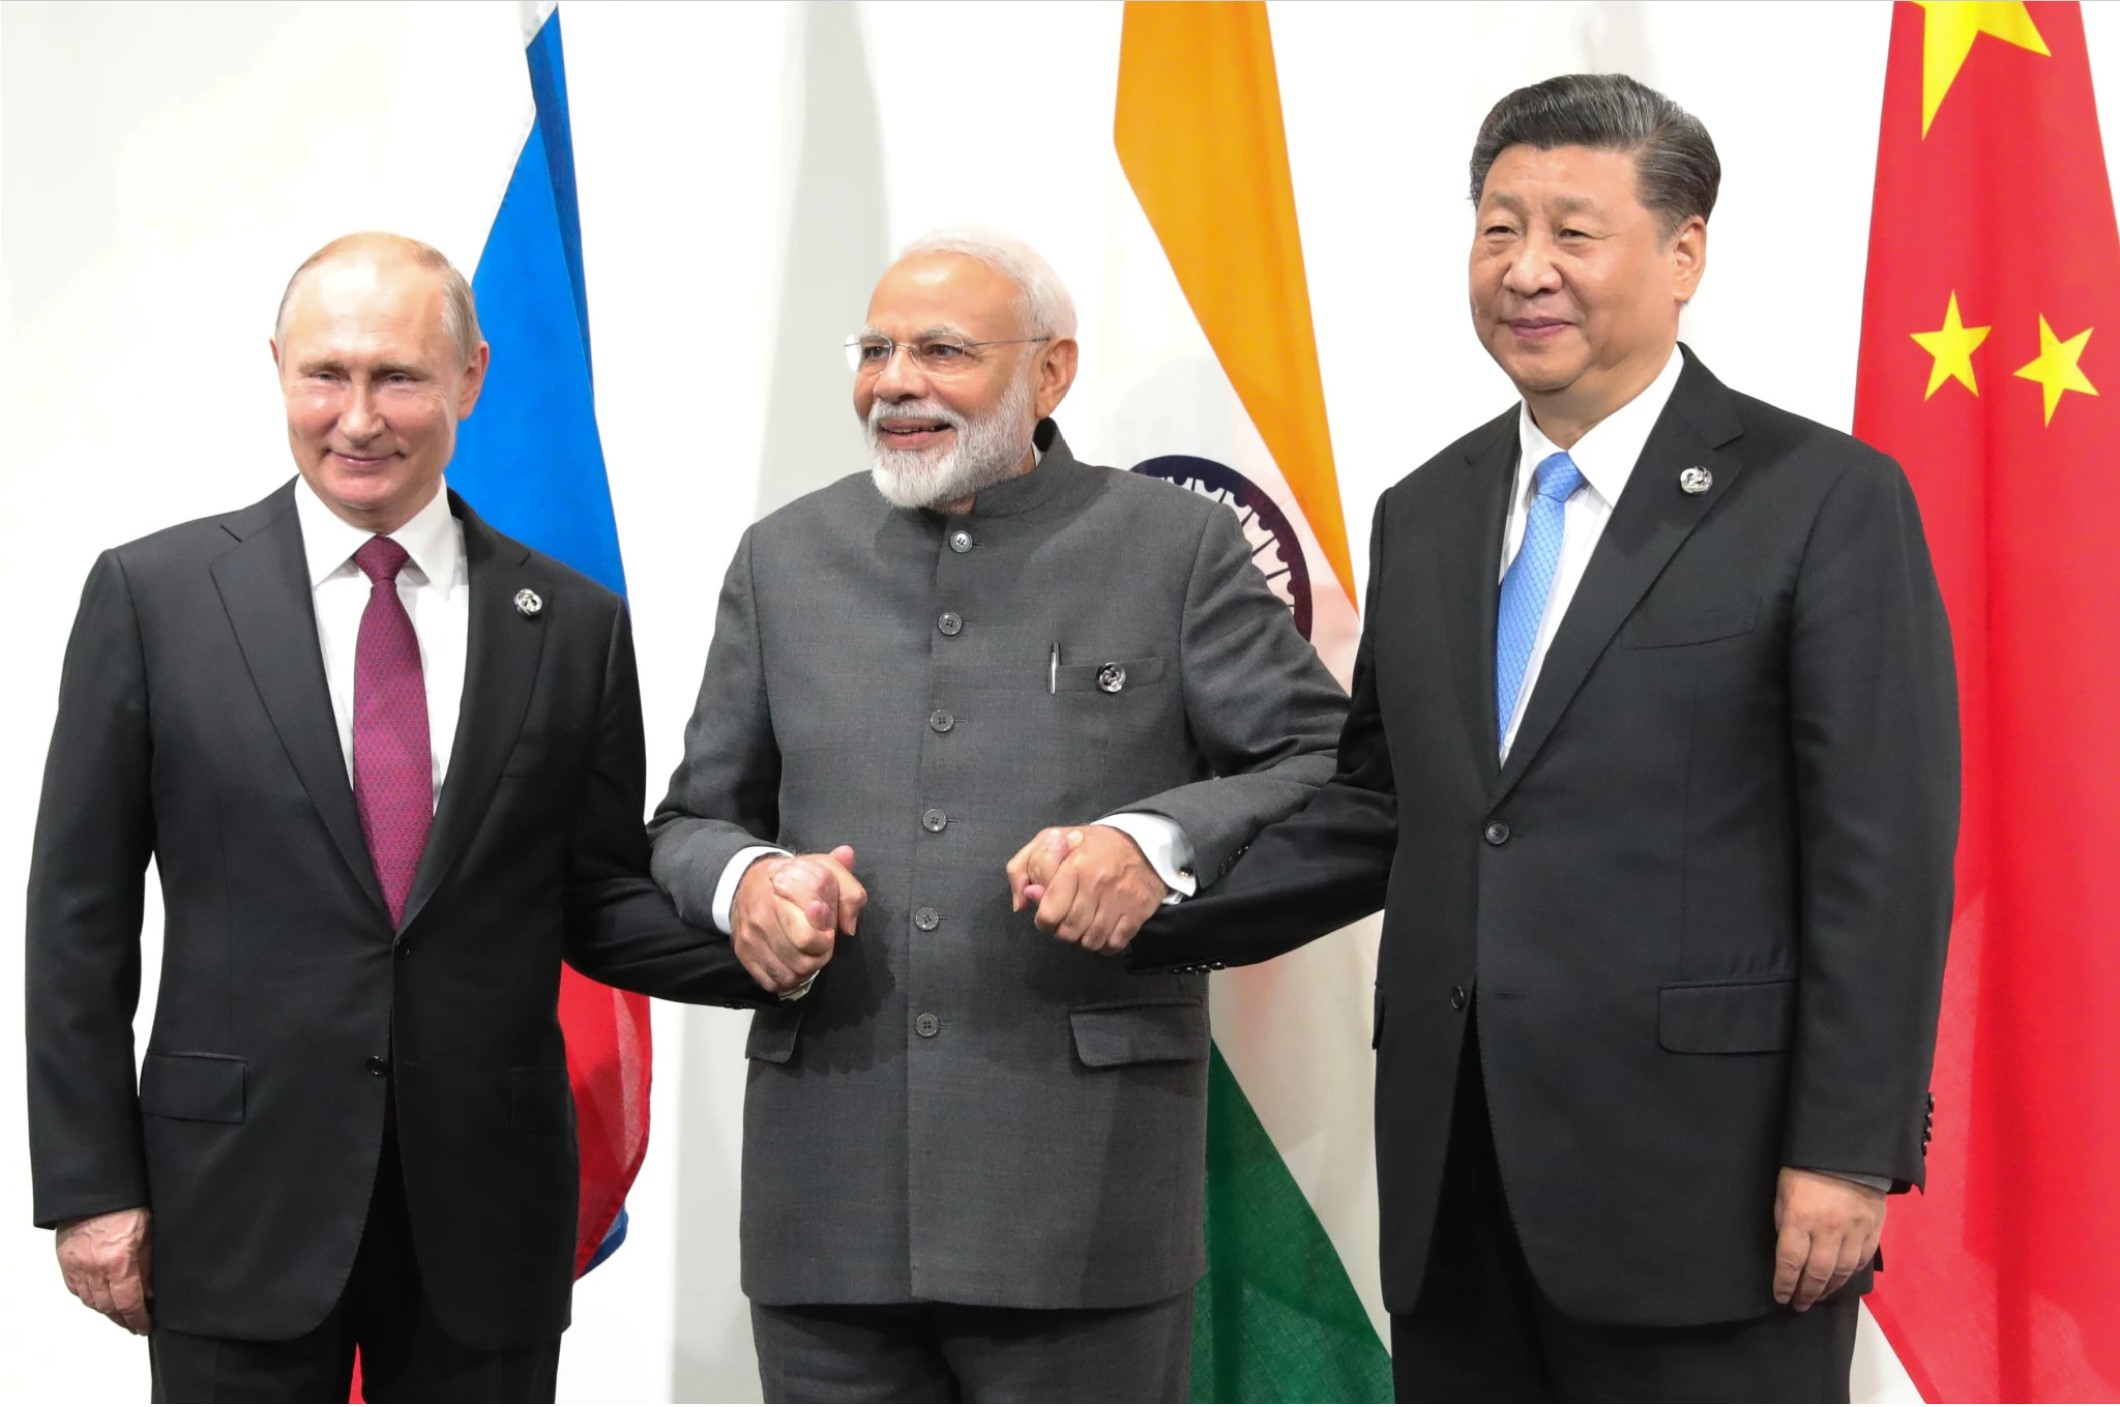 Russia Joins the Asian Club